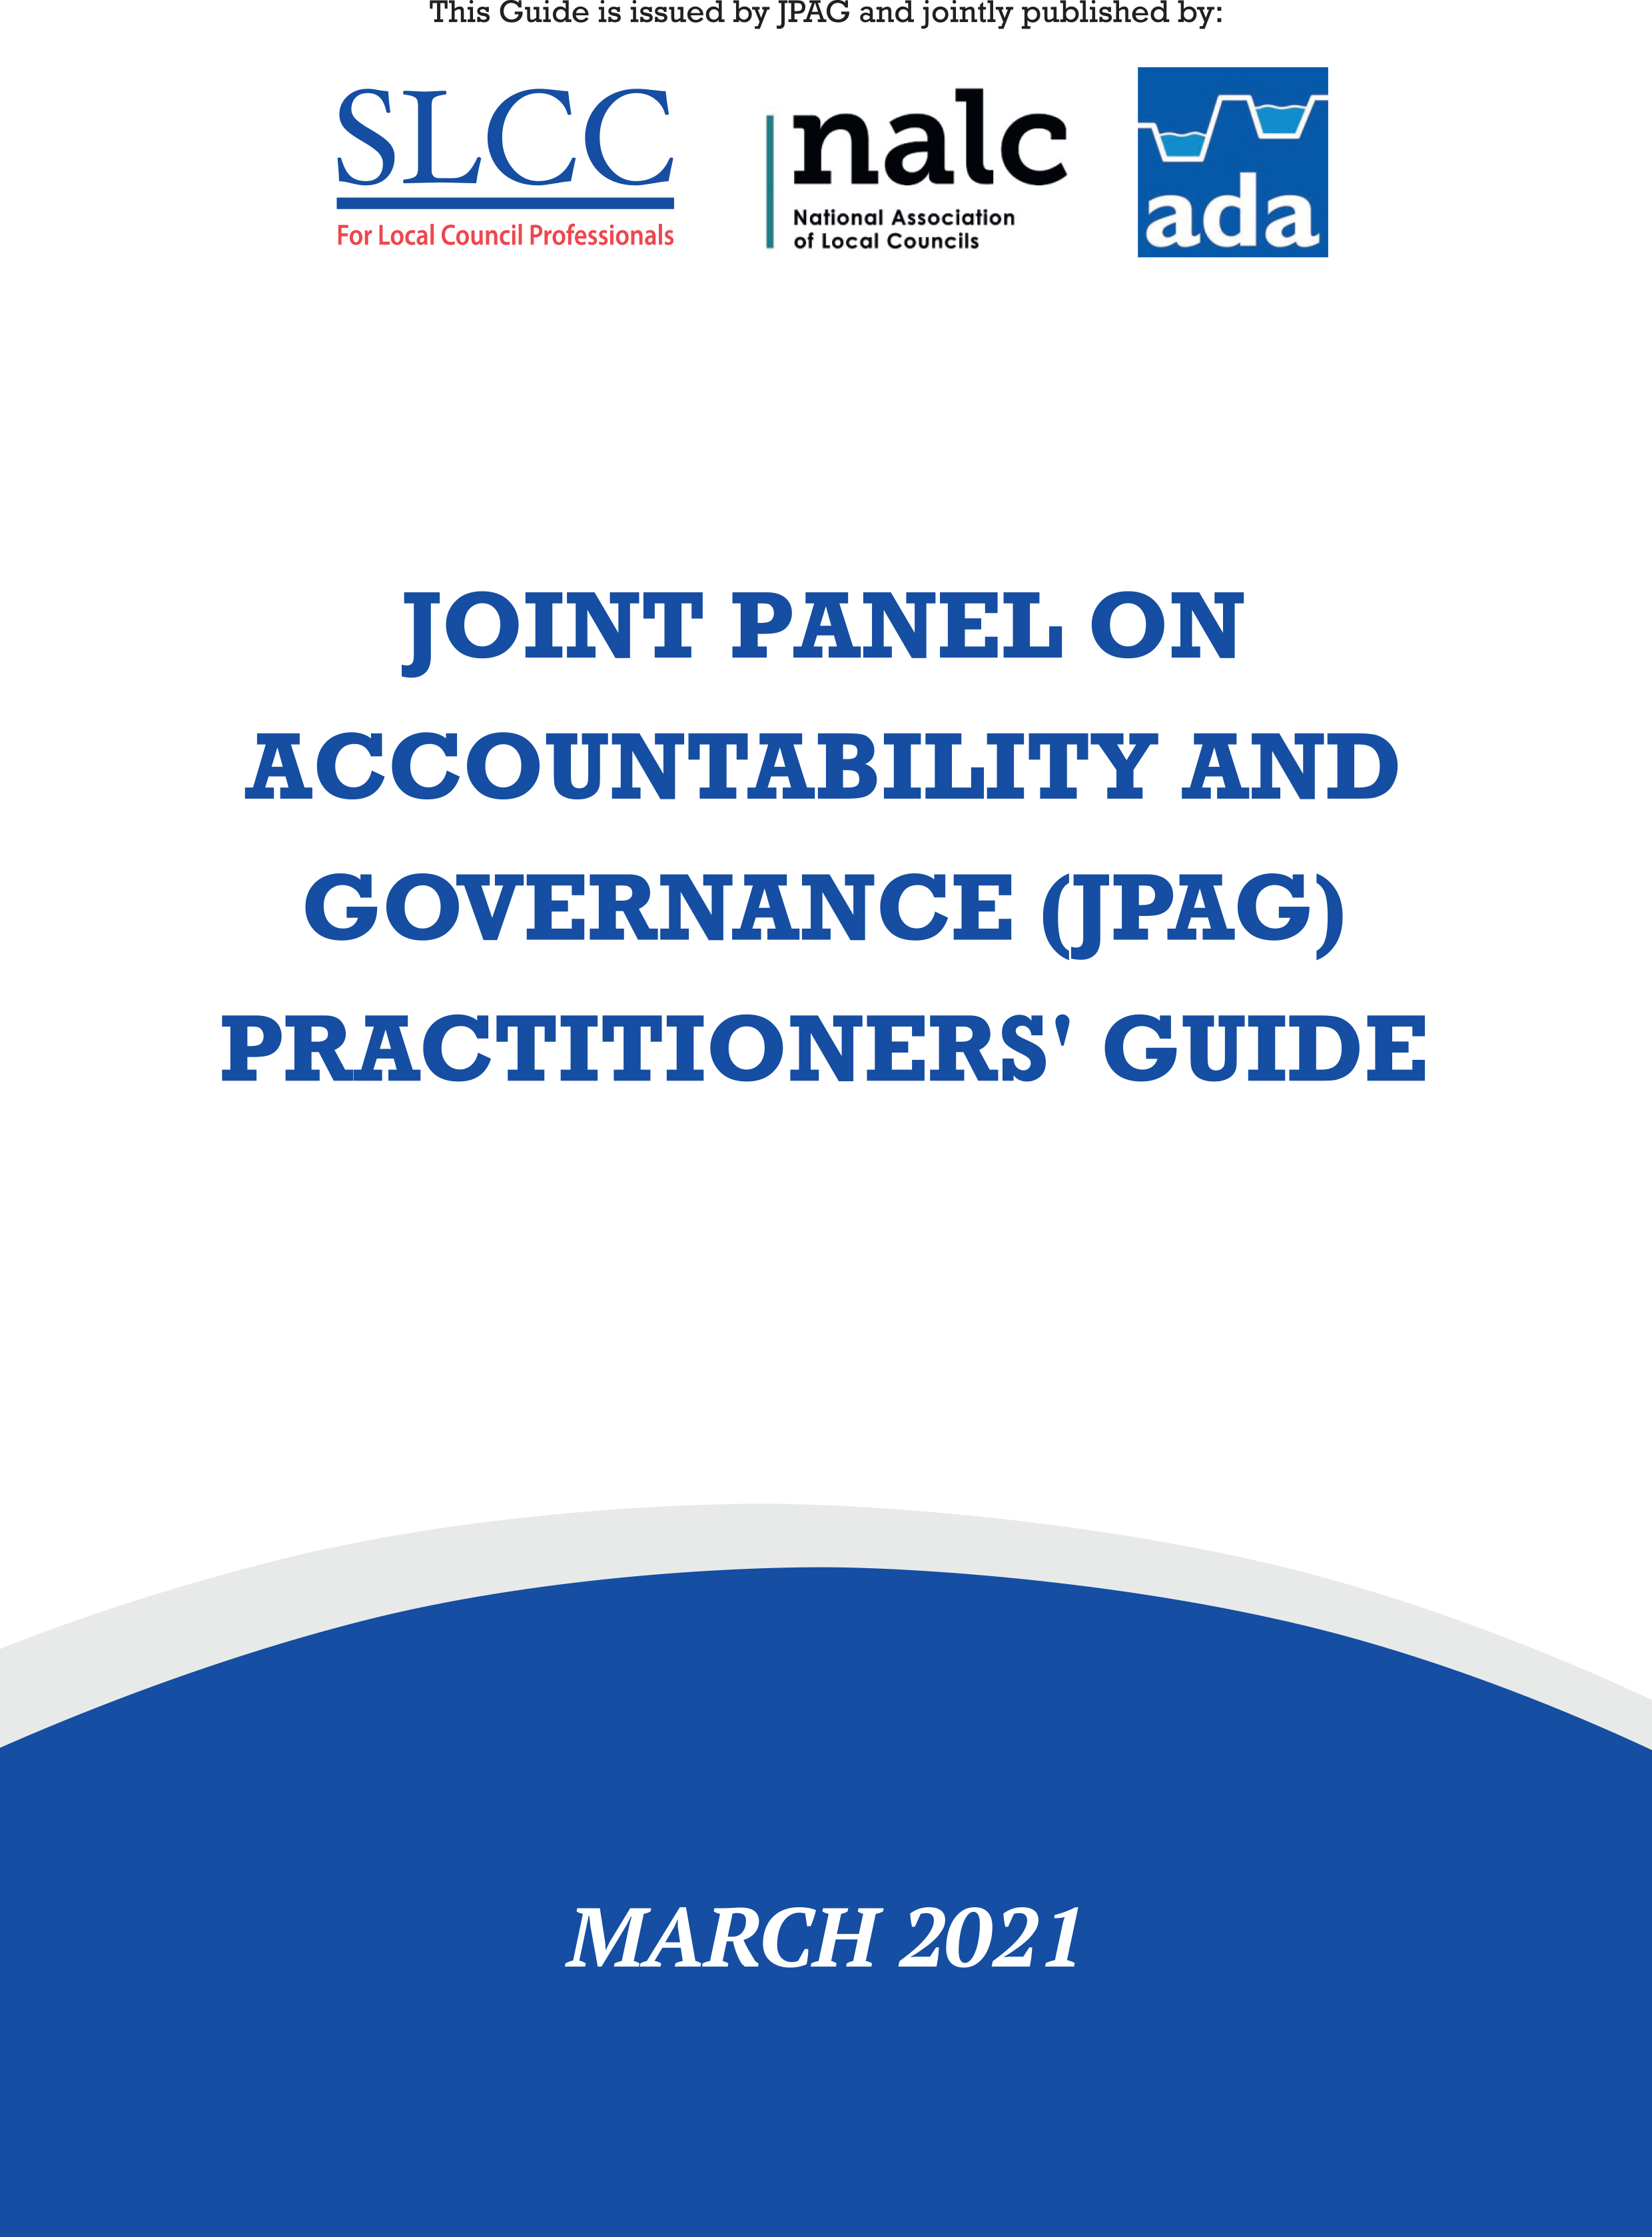 Governance and Accountability for Smaller Authorities in England - Practitioners Guide 2021